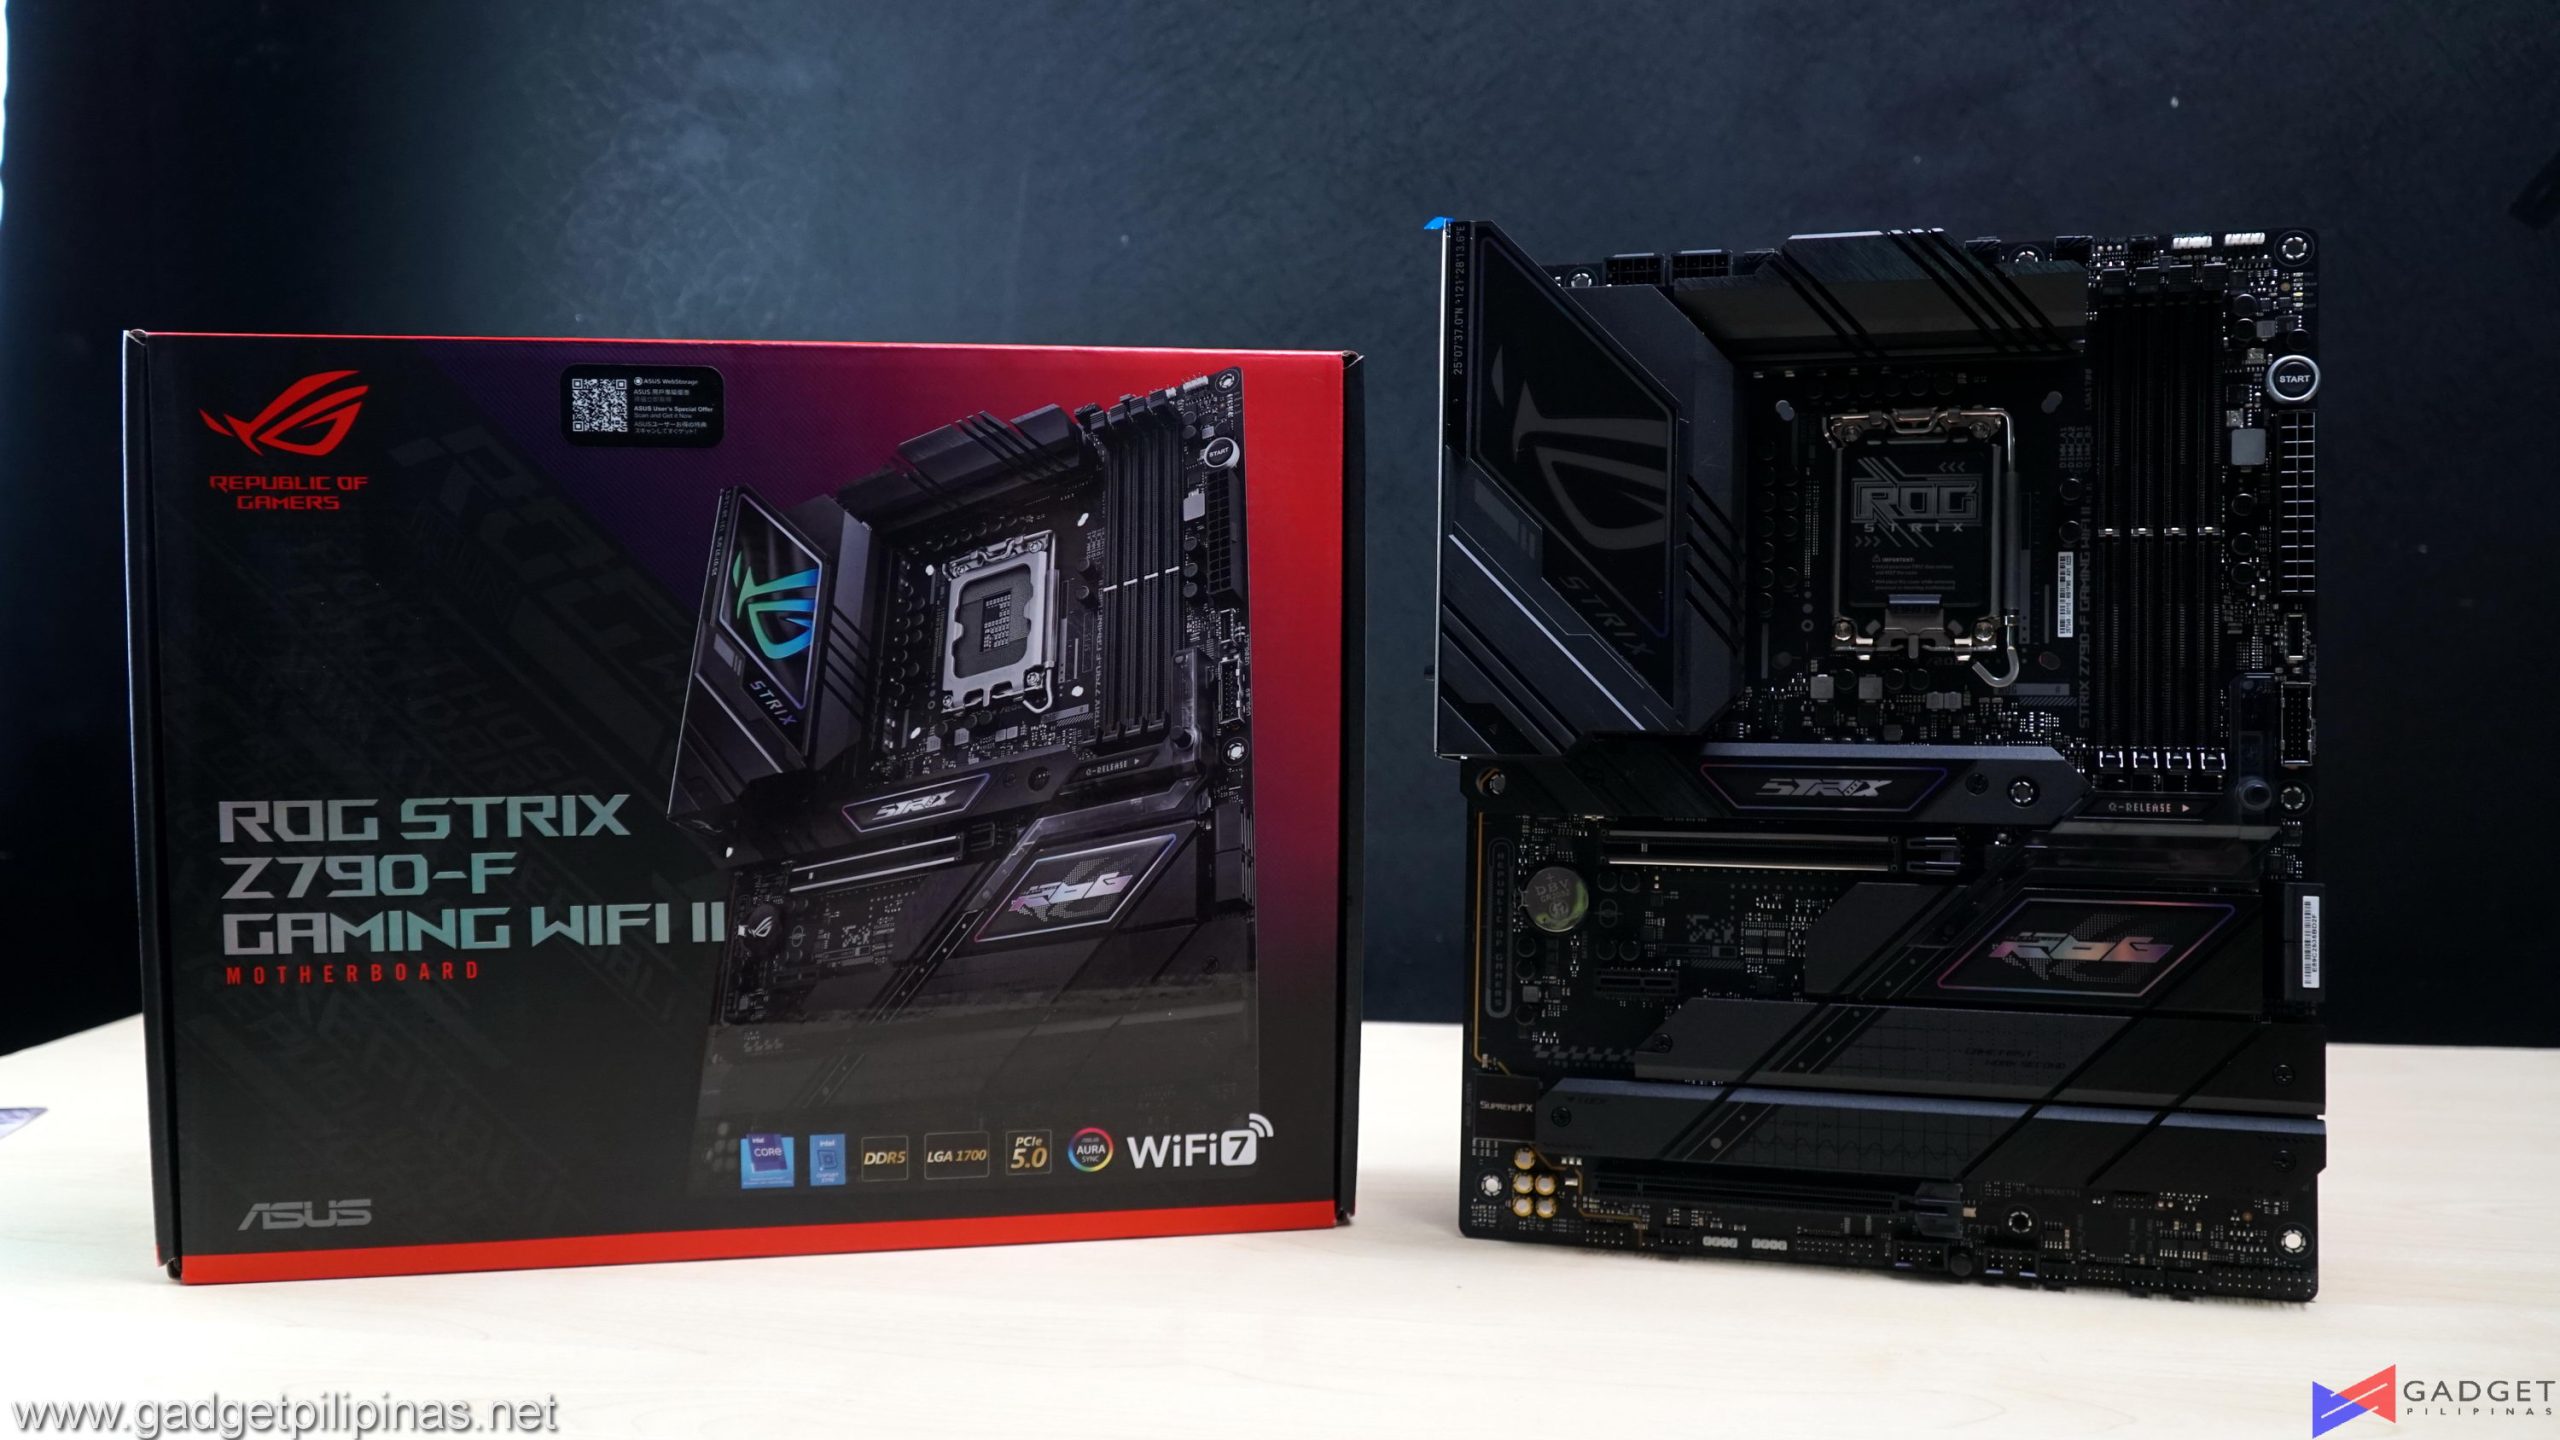 ASUS ROG Strix Z790 F Gaming WiFi II Review Philippines